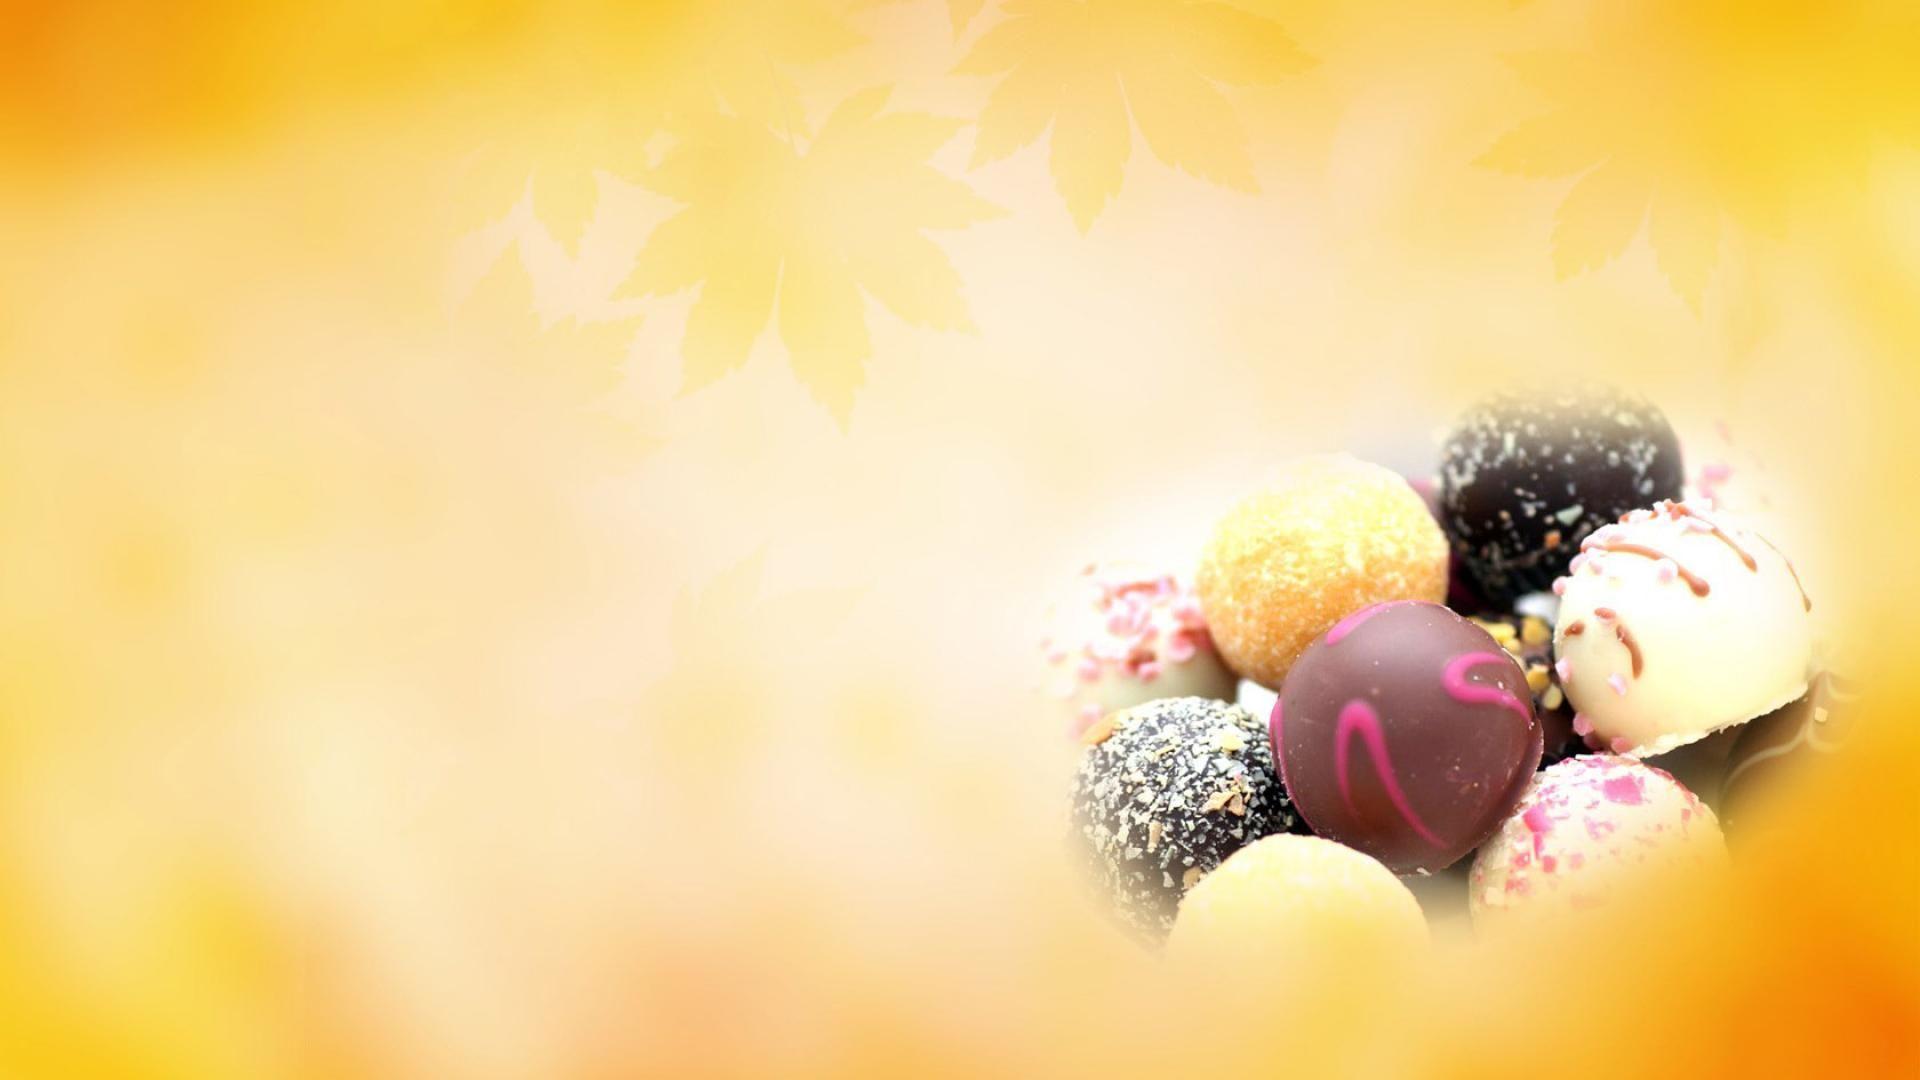 Wallpaper.wiki Cute Ice Cream Background Free Download PIC WPE009836